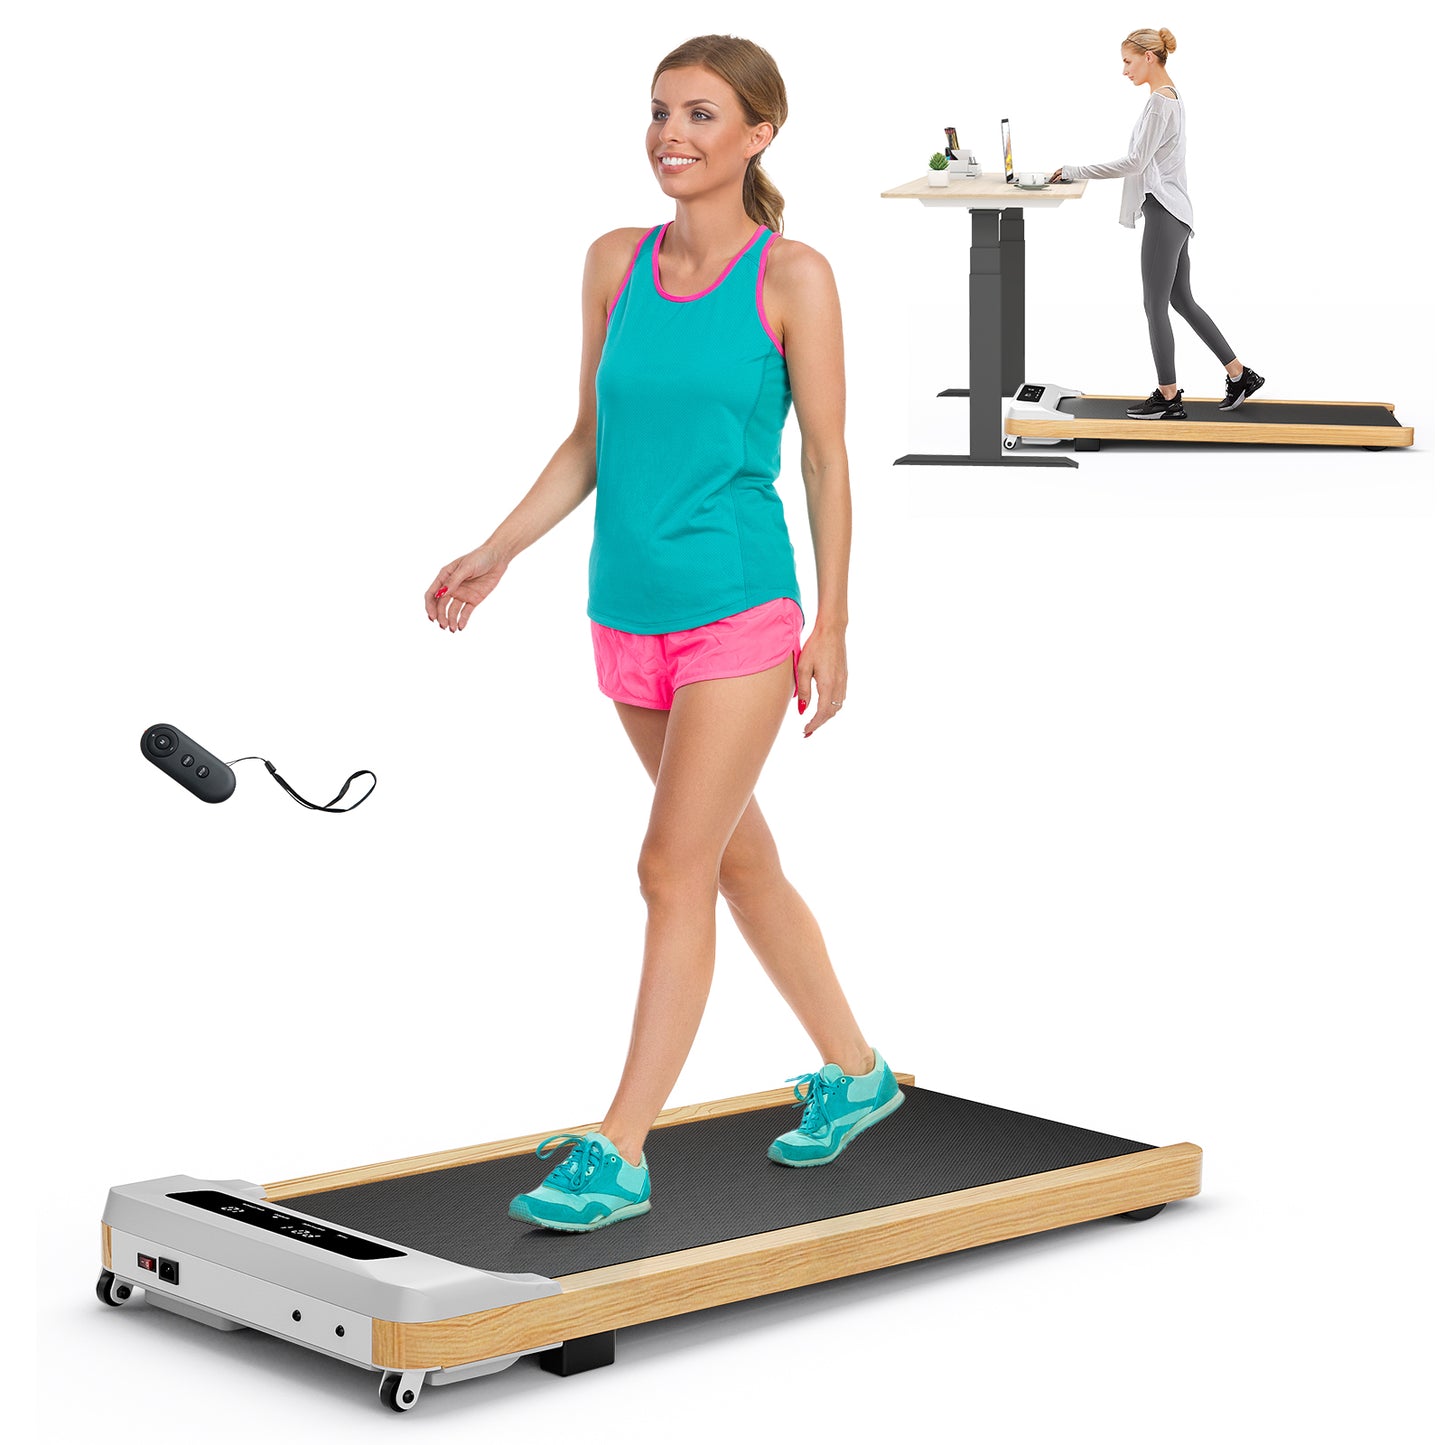 Under Desk Treadmill with Remote Control and LED Display for Home Office